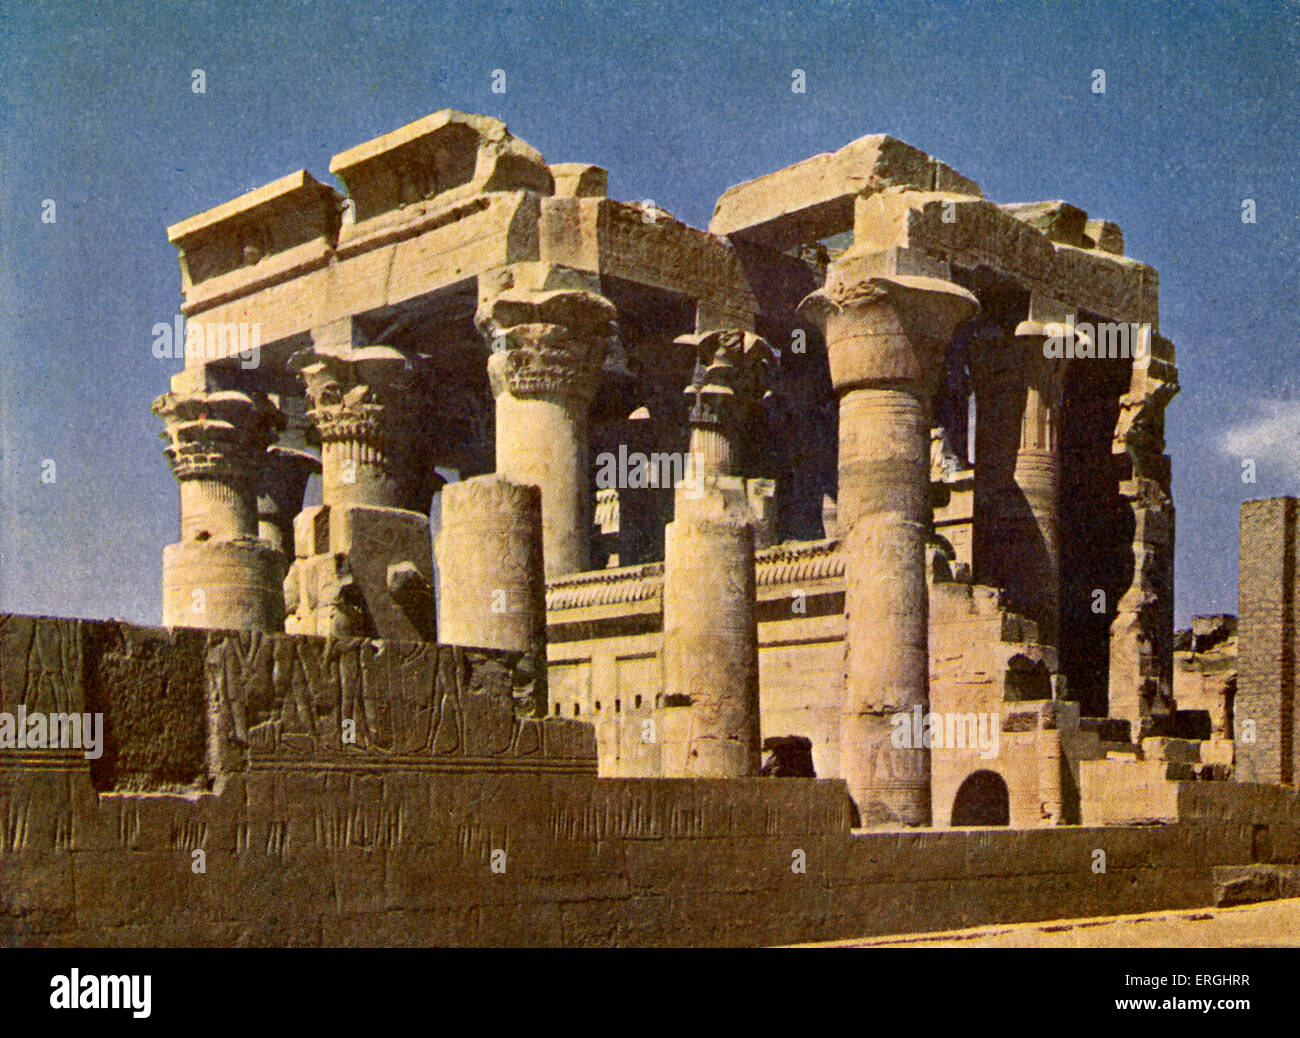 Temple of Kom Ombo, Egypt. Photograph from book of 1923. Stock Photo